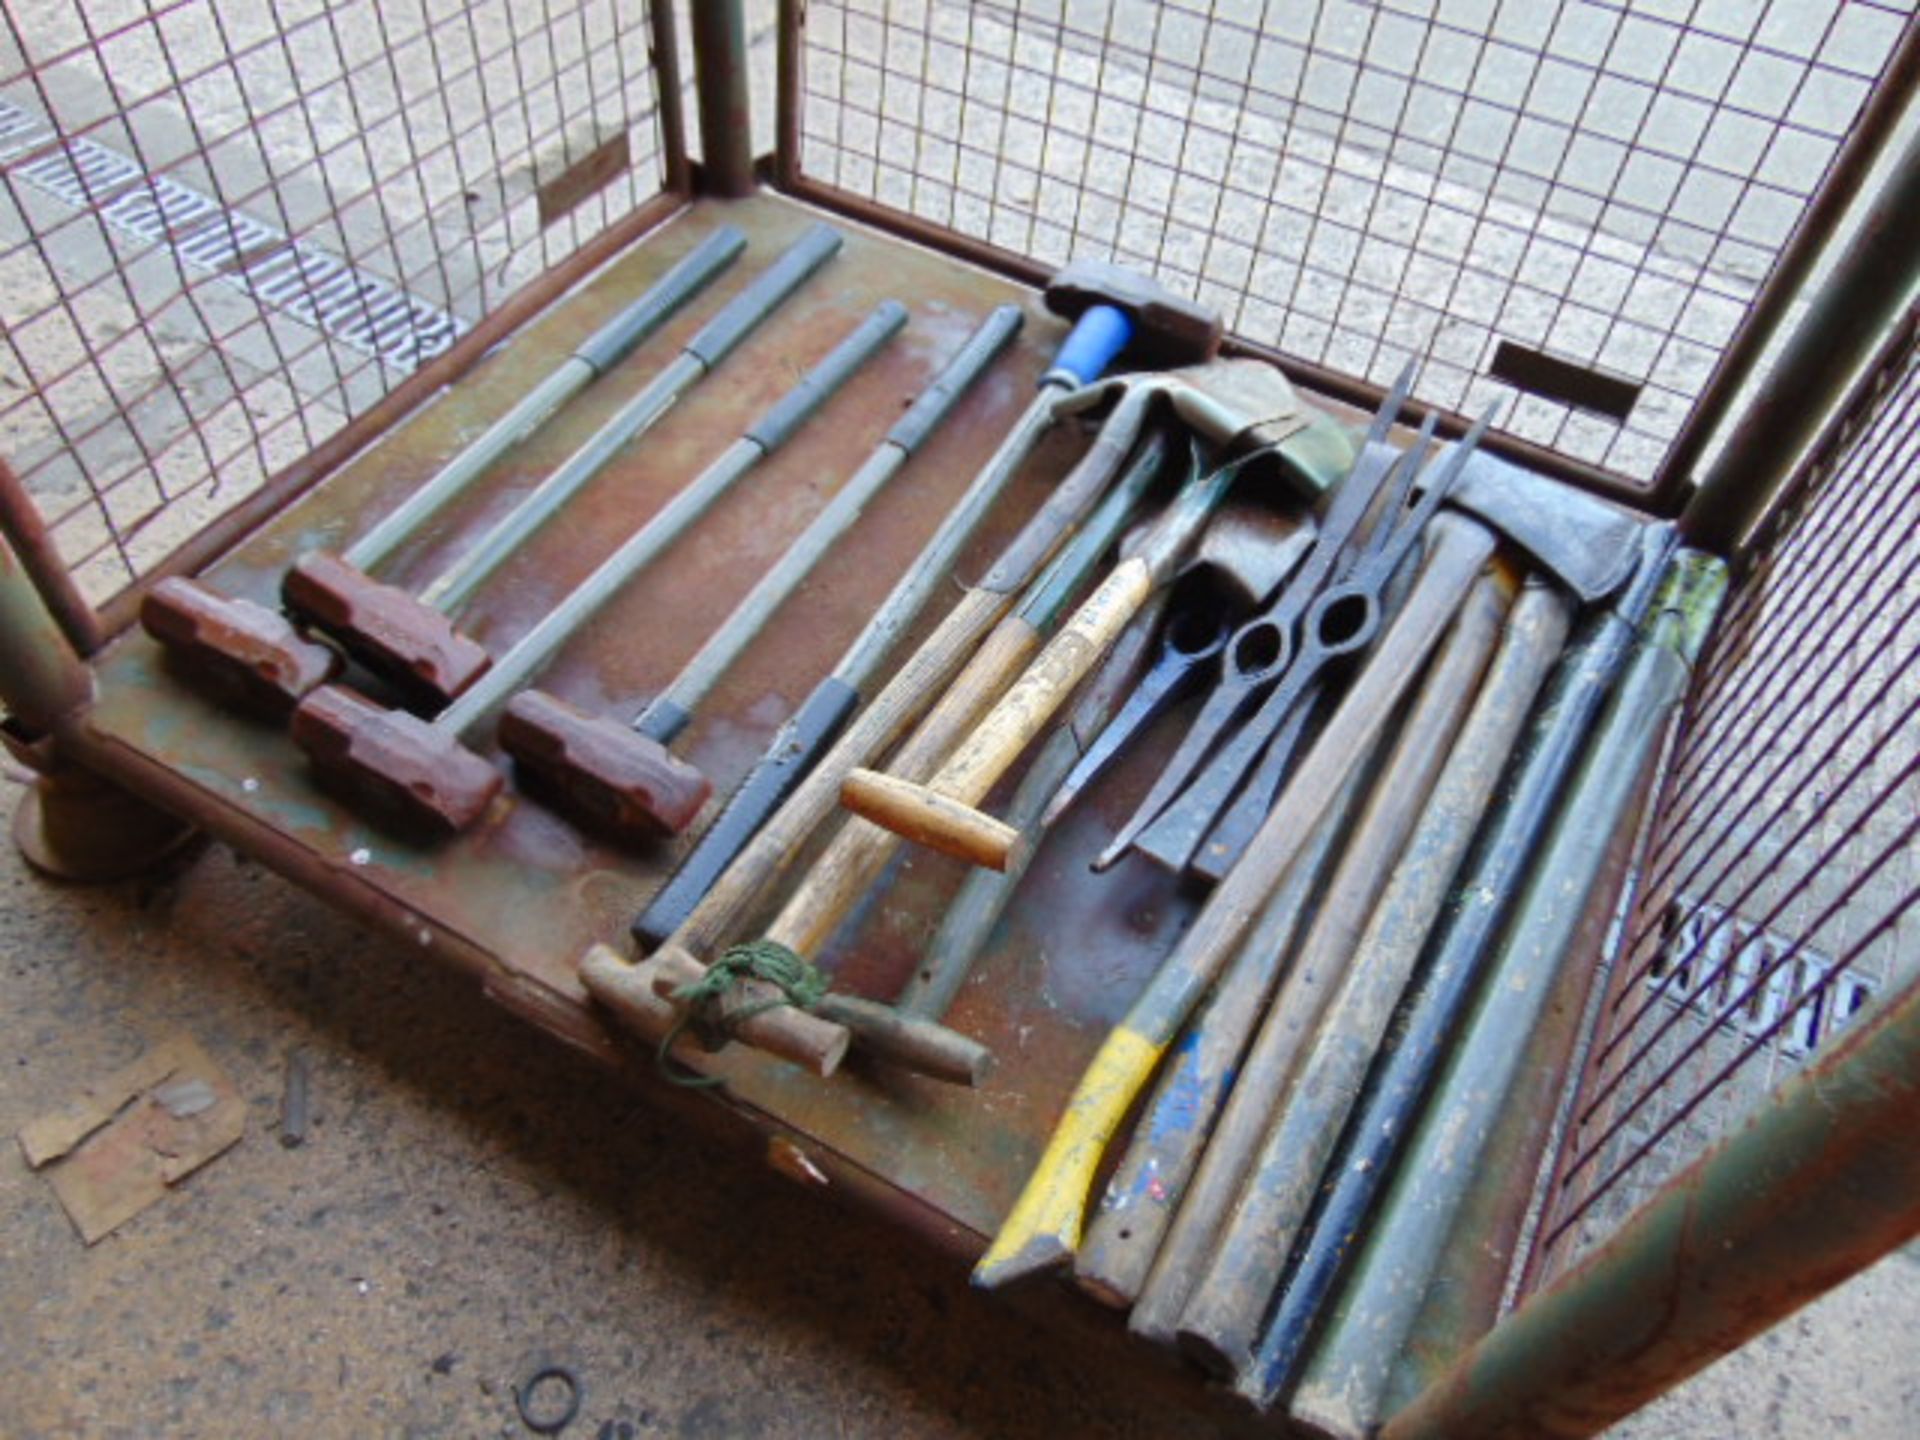 1 x Stillage British Army Axes, Sledge Hammers, T handle Shovels, Picks and helves (20 items) - Image 3 of 5